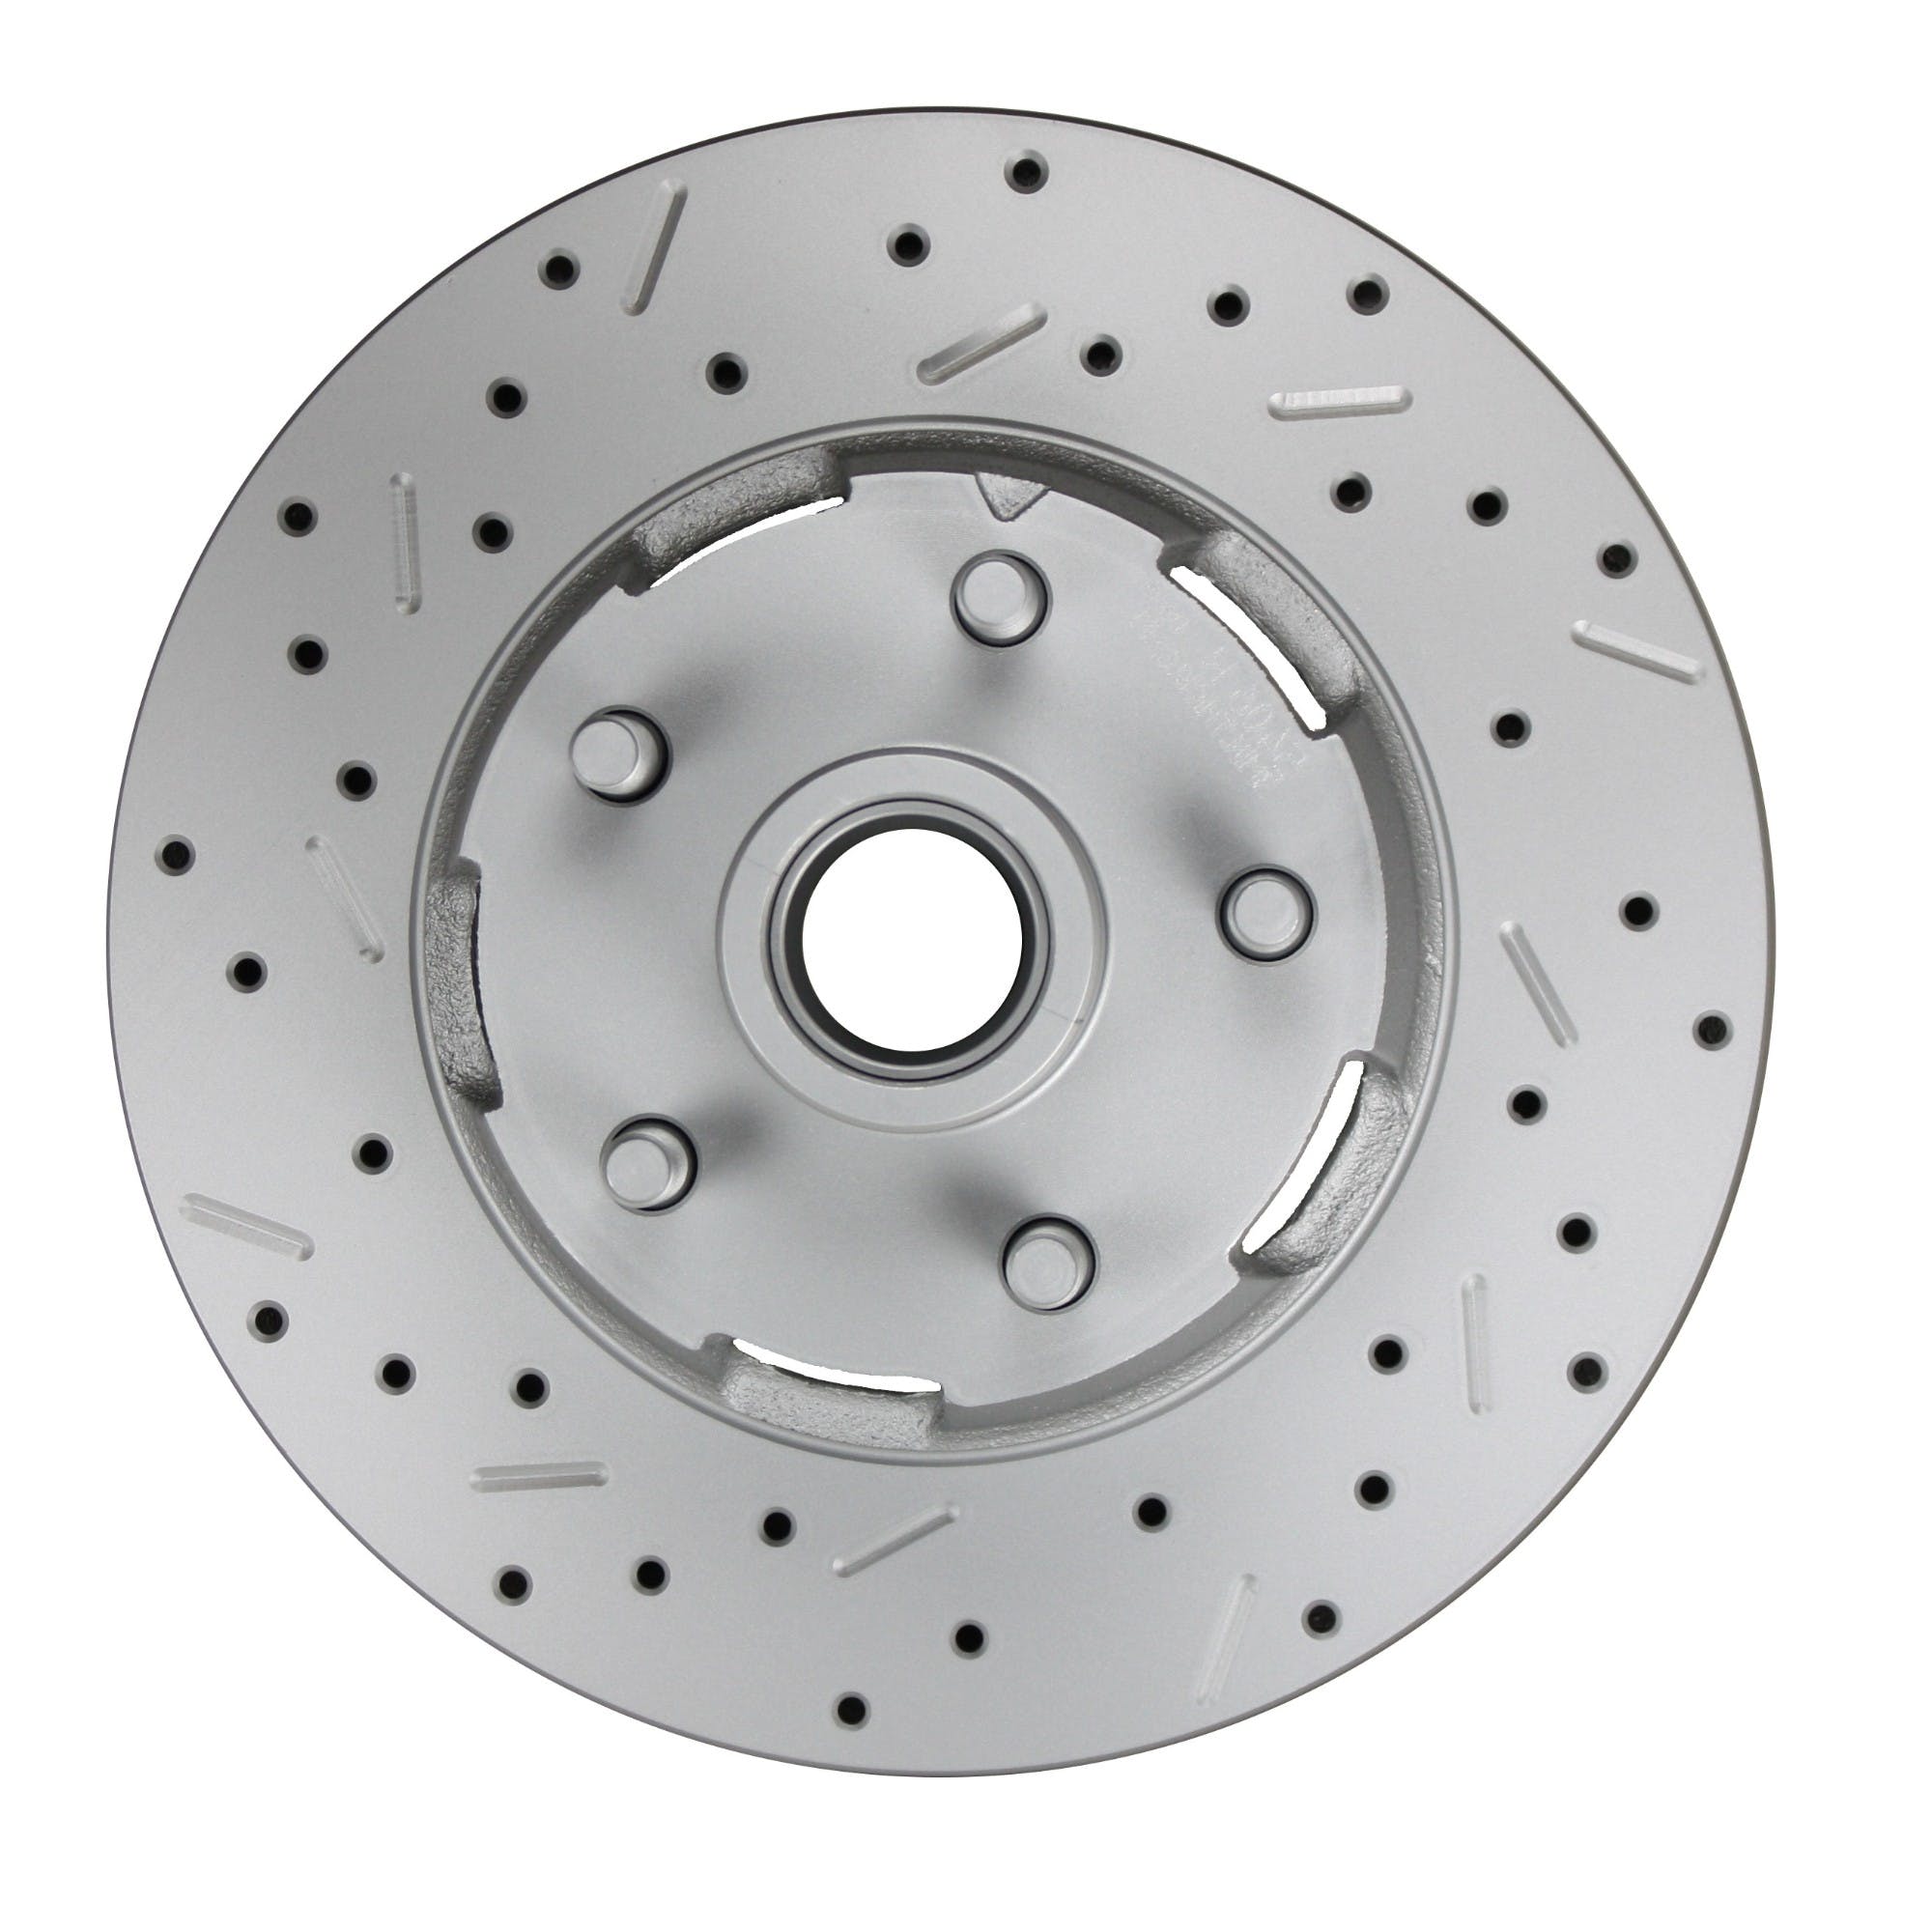 LEED Brakes 5406001 LCDS Rotor Left side Cross drilled and slotted